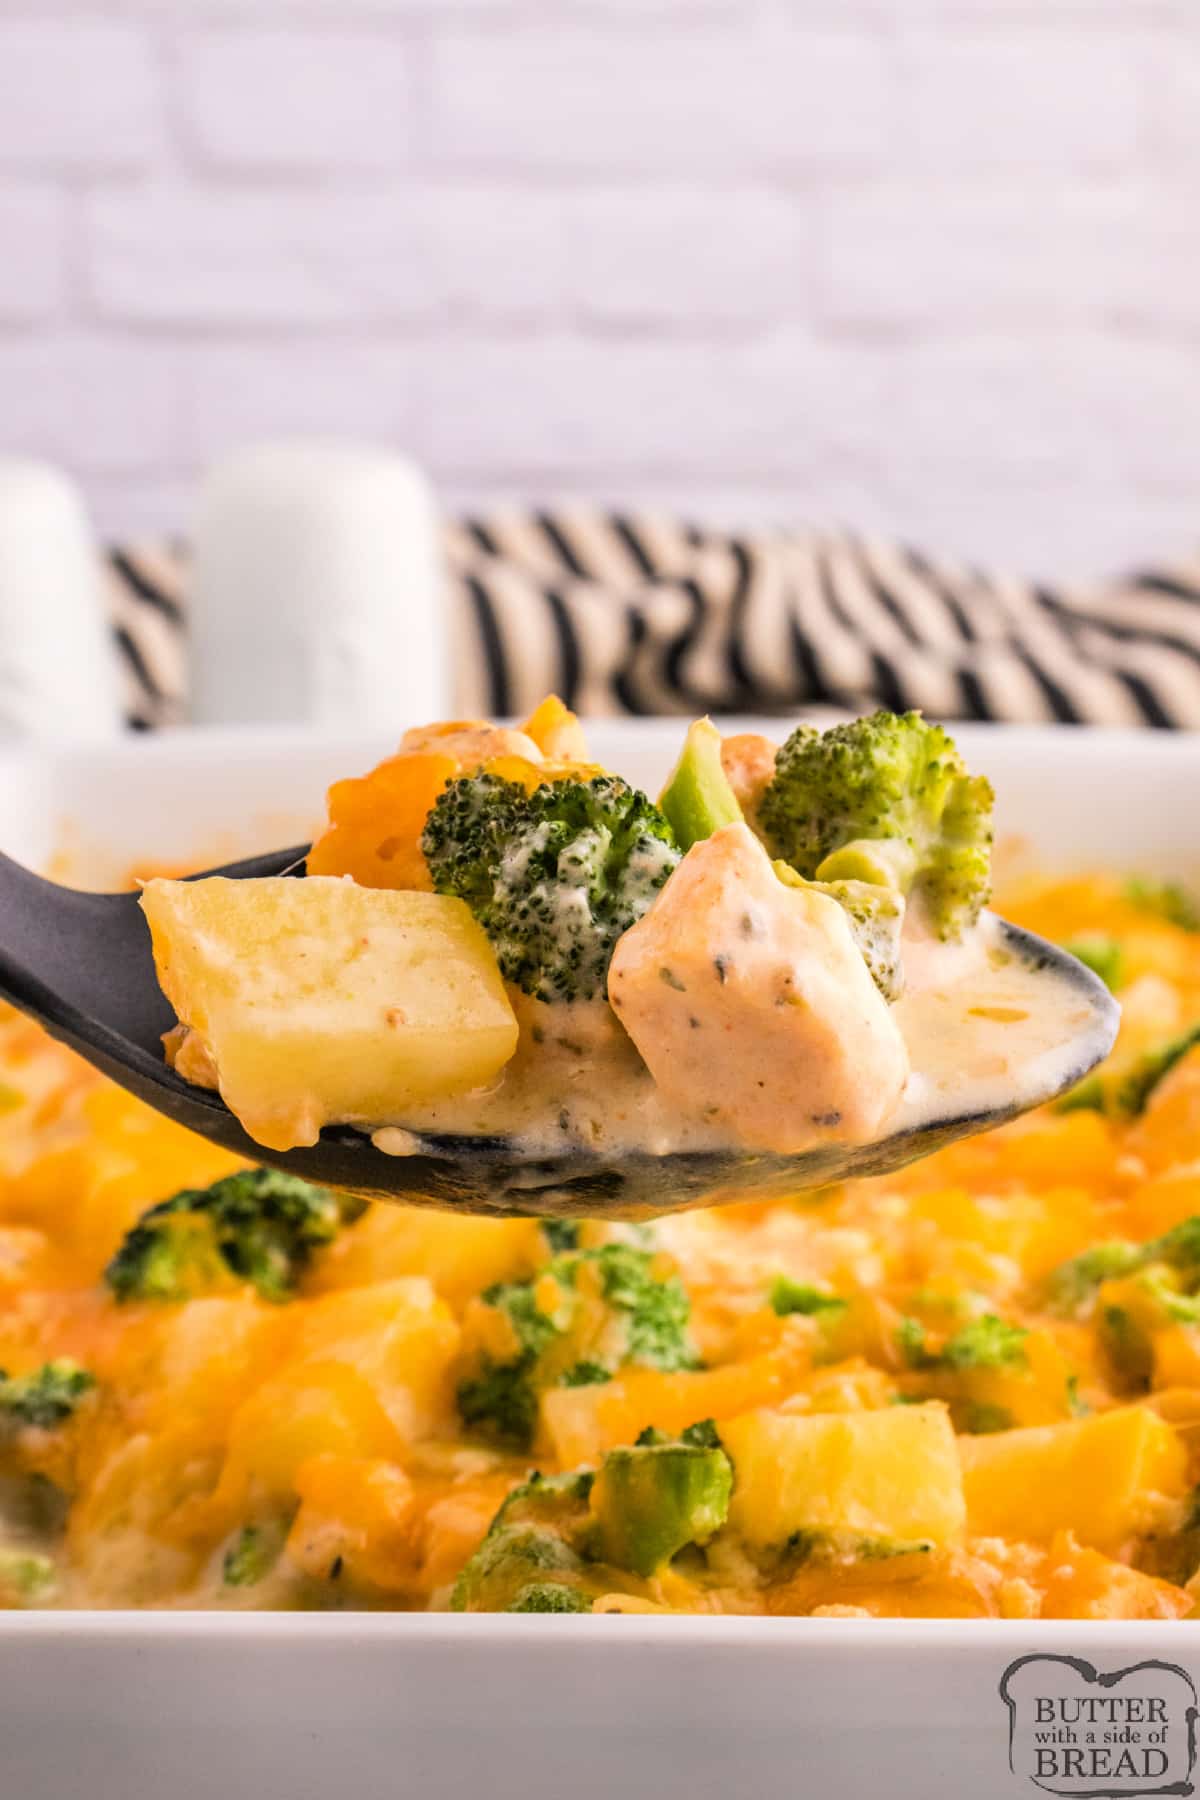 Chicken, potatoes, broccoli, and cheese. 